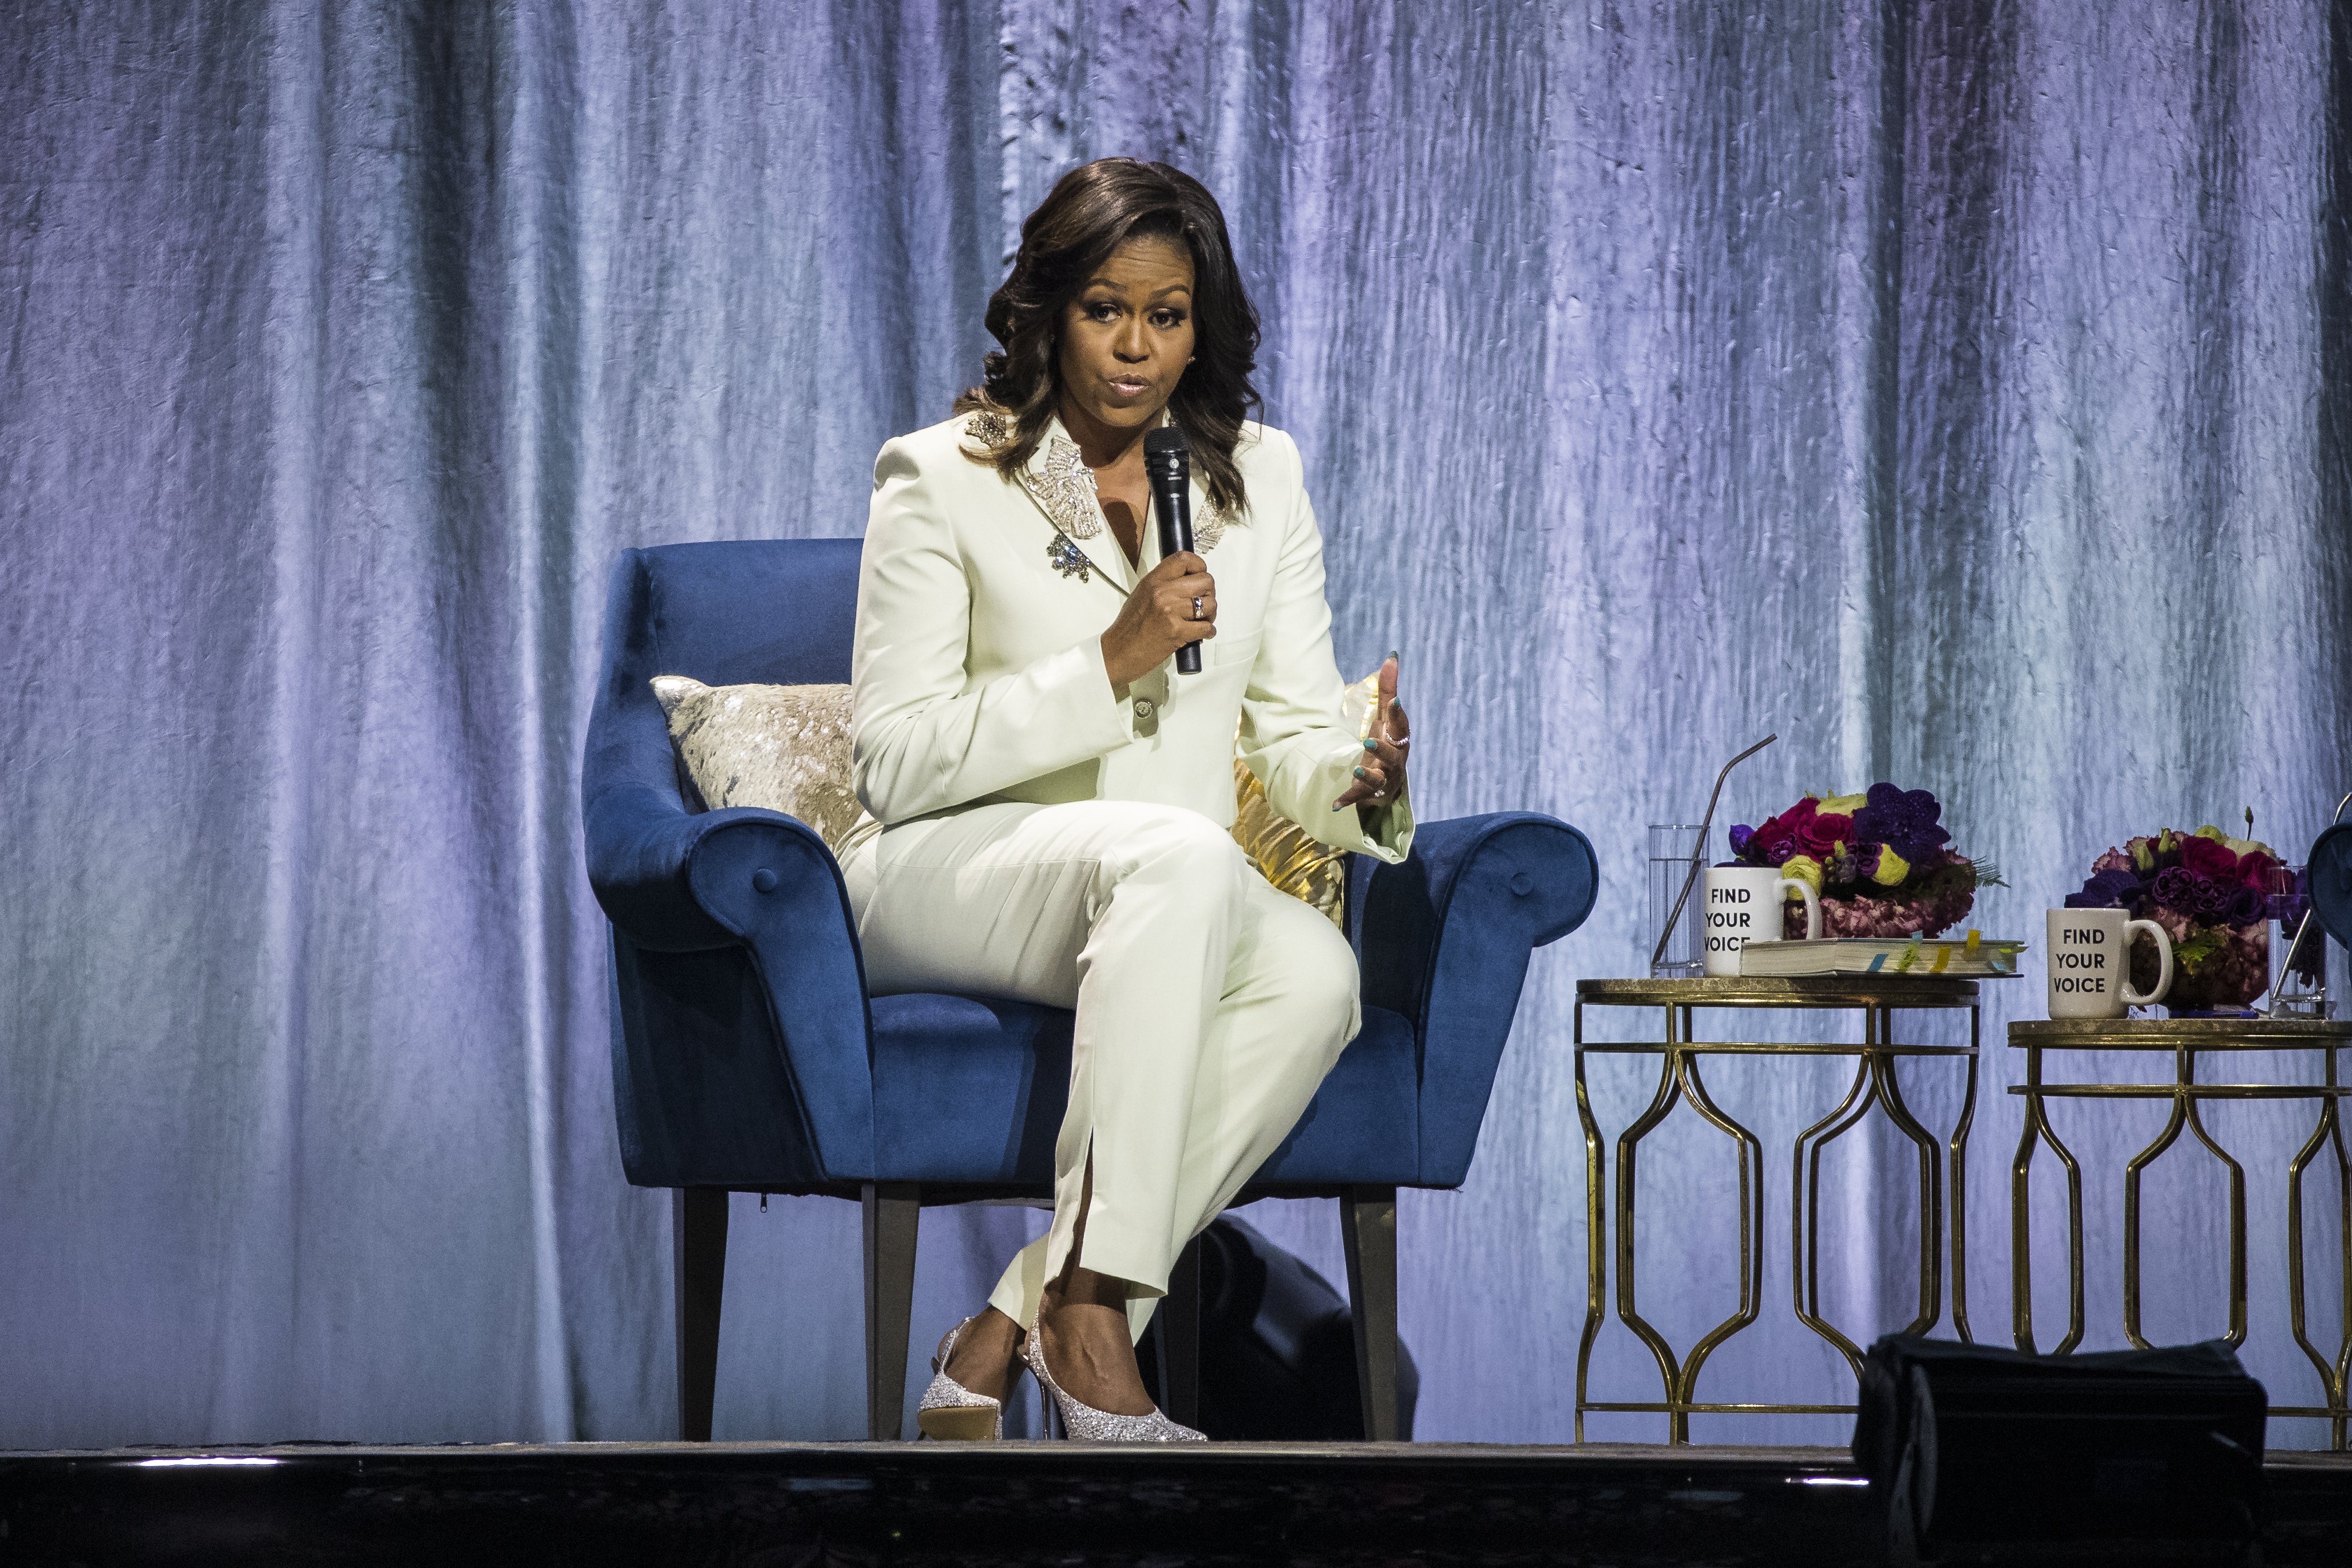 Michelle Obama during her 'Becoming: An Intimate Conversation with Michelle Obama' Tour in Stockholm, Sweden. April 10, 2019. | Photo: GettyImages